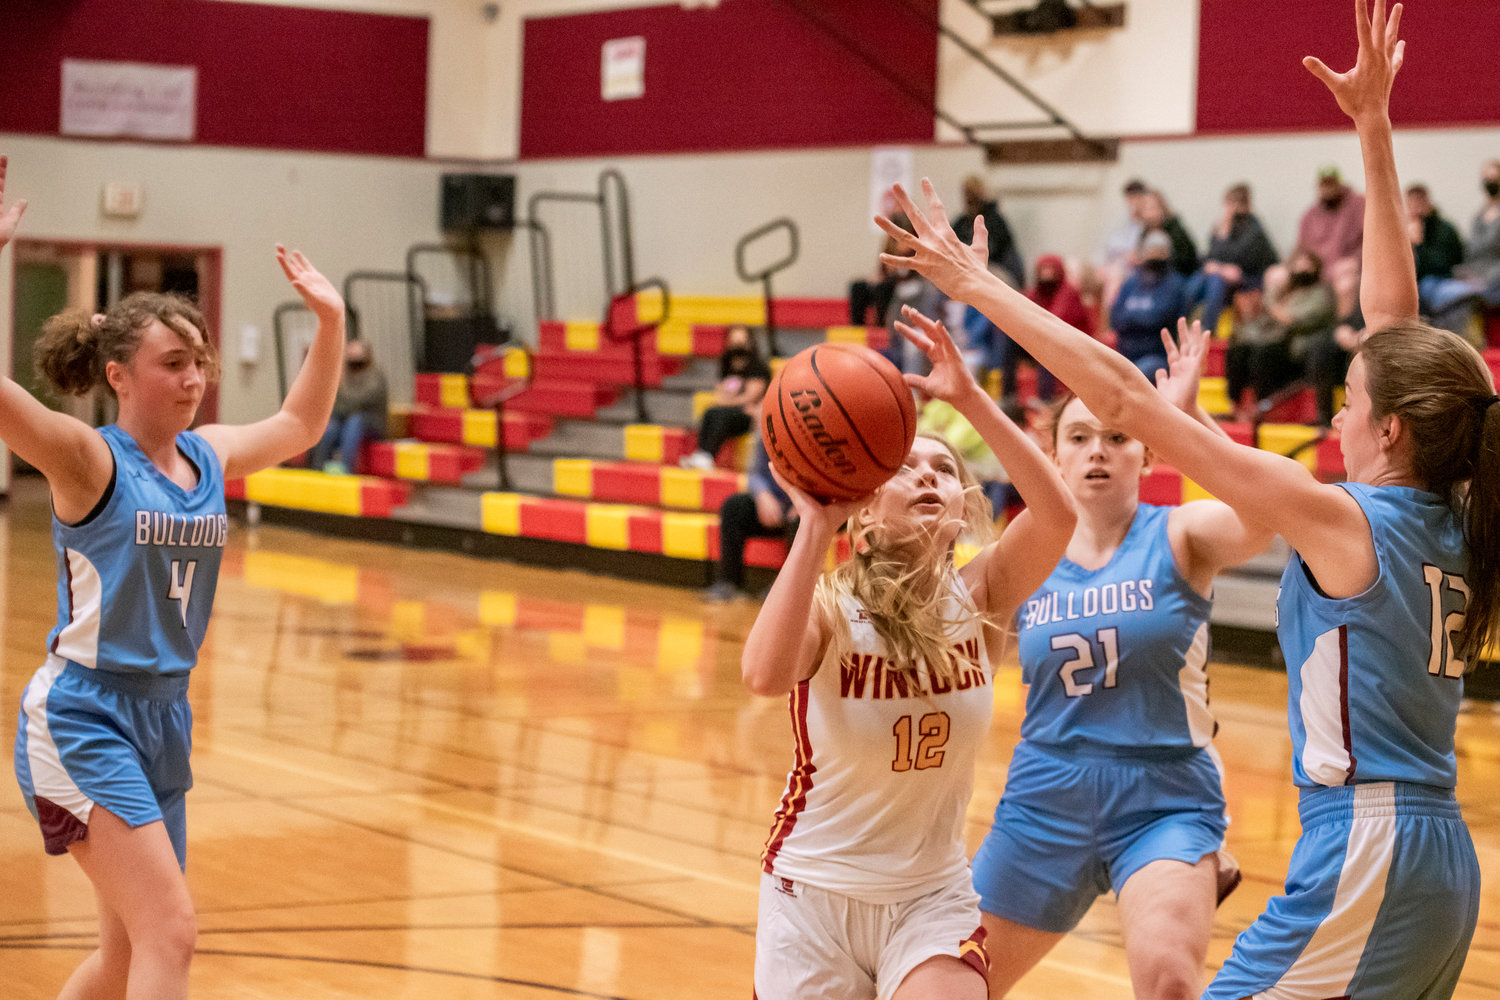 Winlock’s Maia Chaney (12) looks to shoot Thursday night during a game against Stevenson.